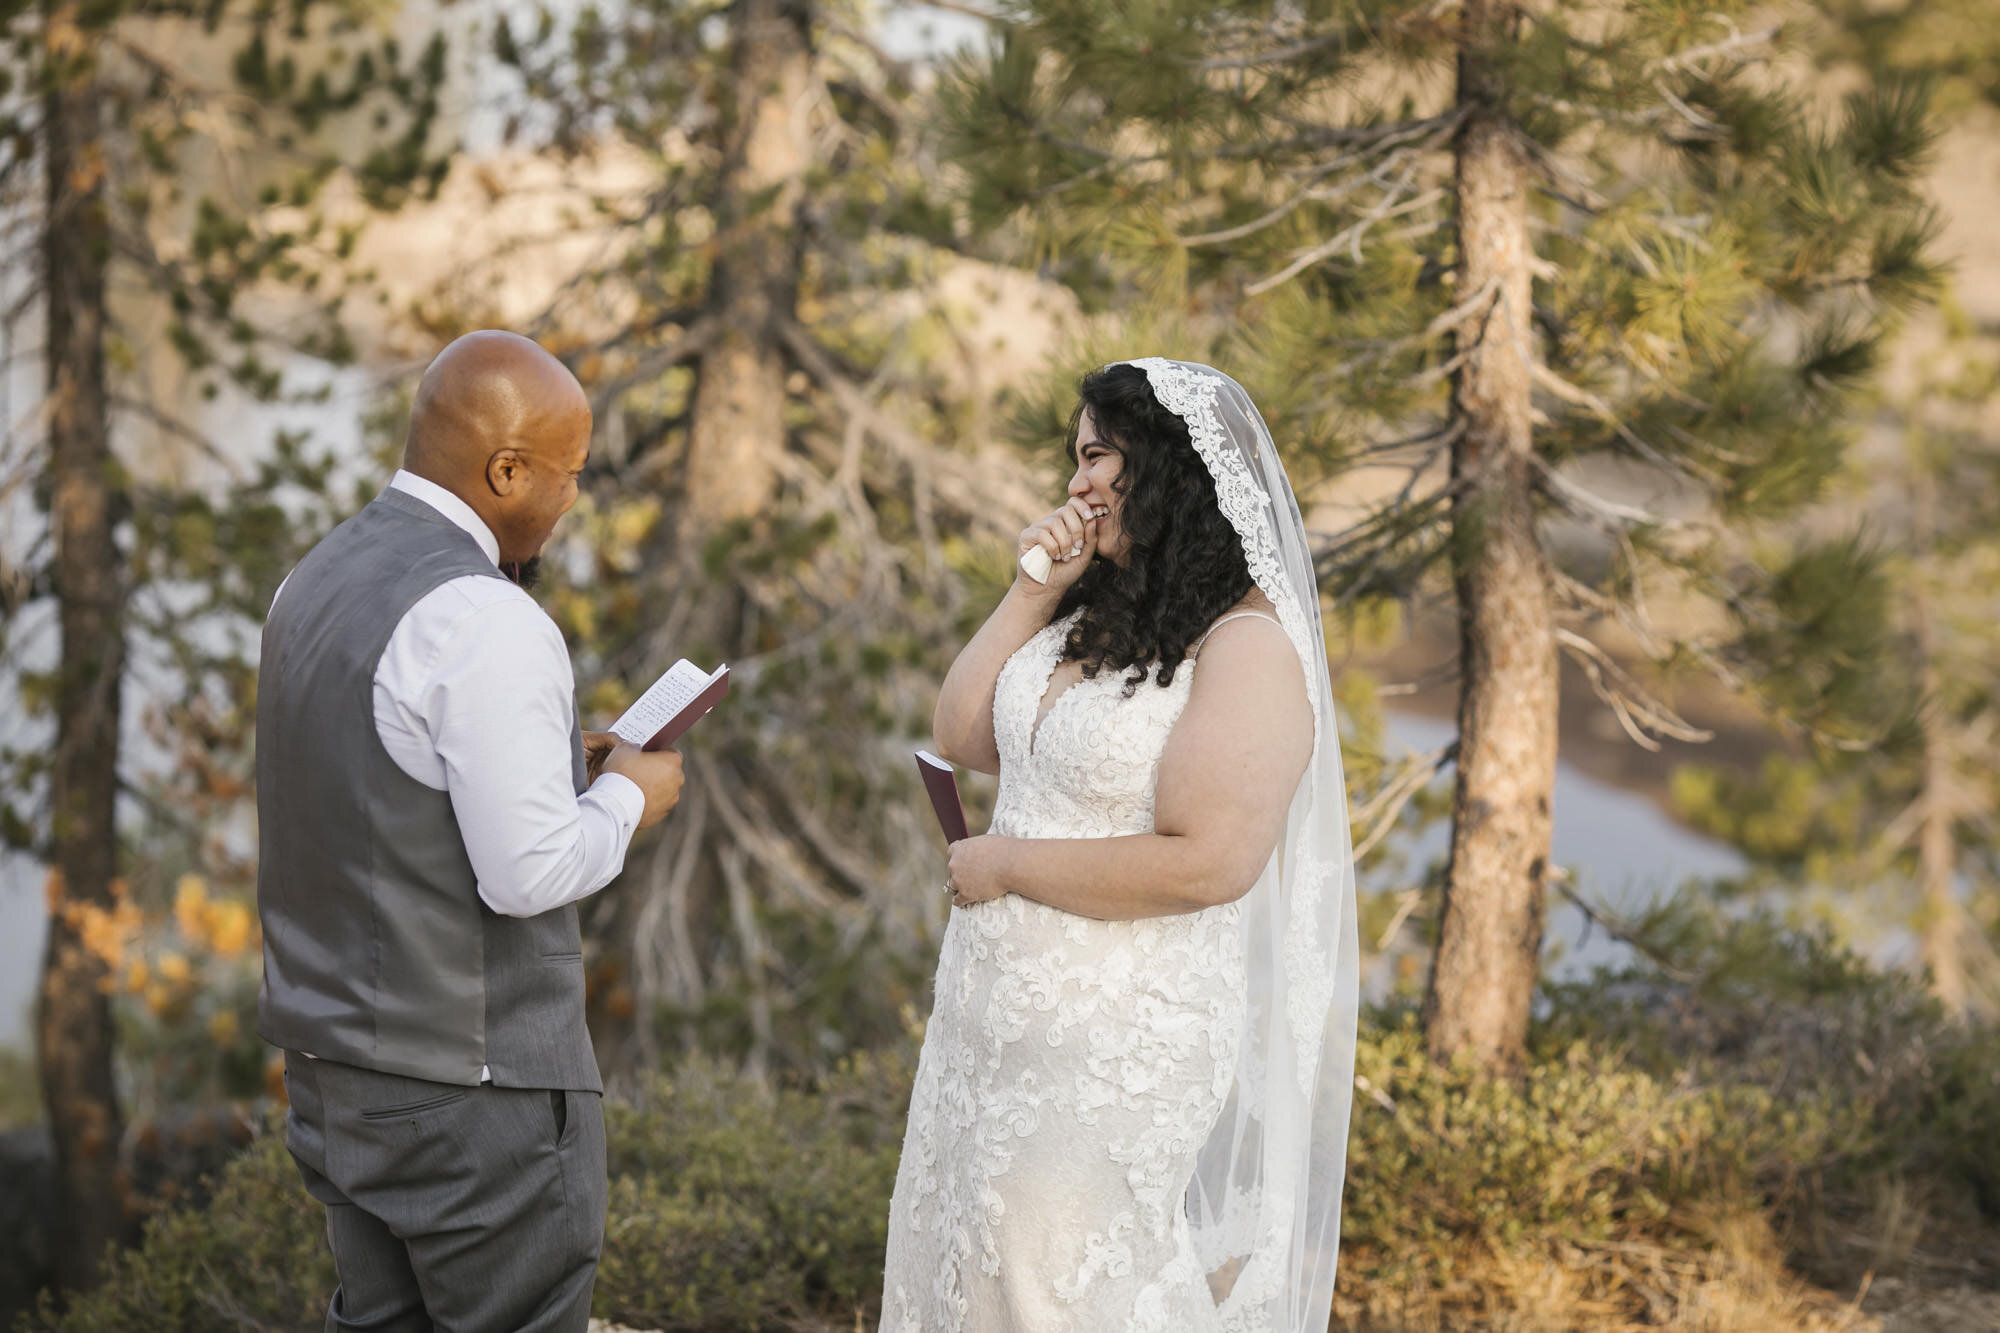 Bride laughs as her groom reads his wedding vows to her in the forest